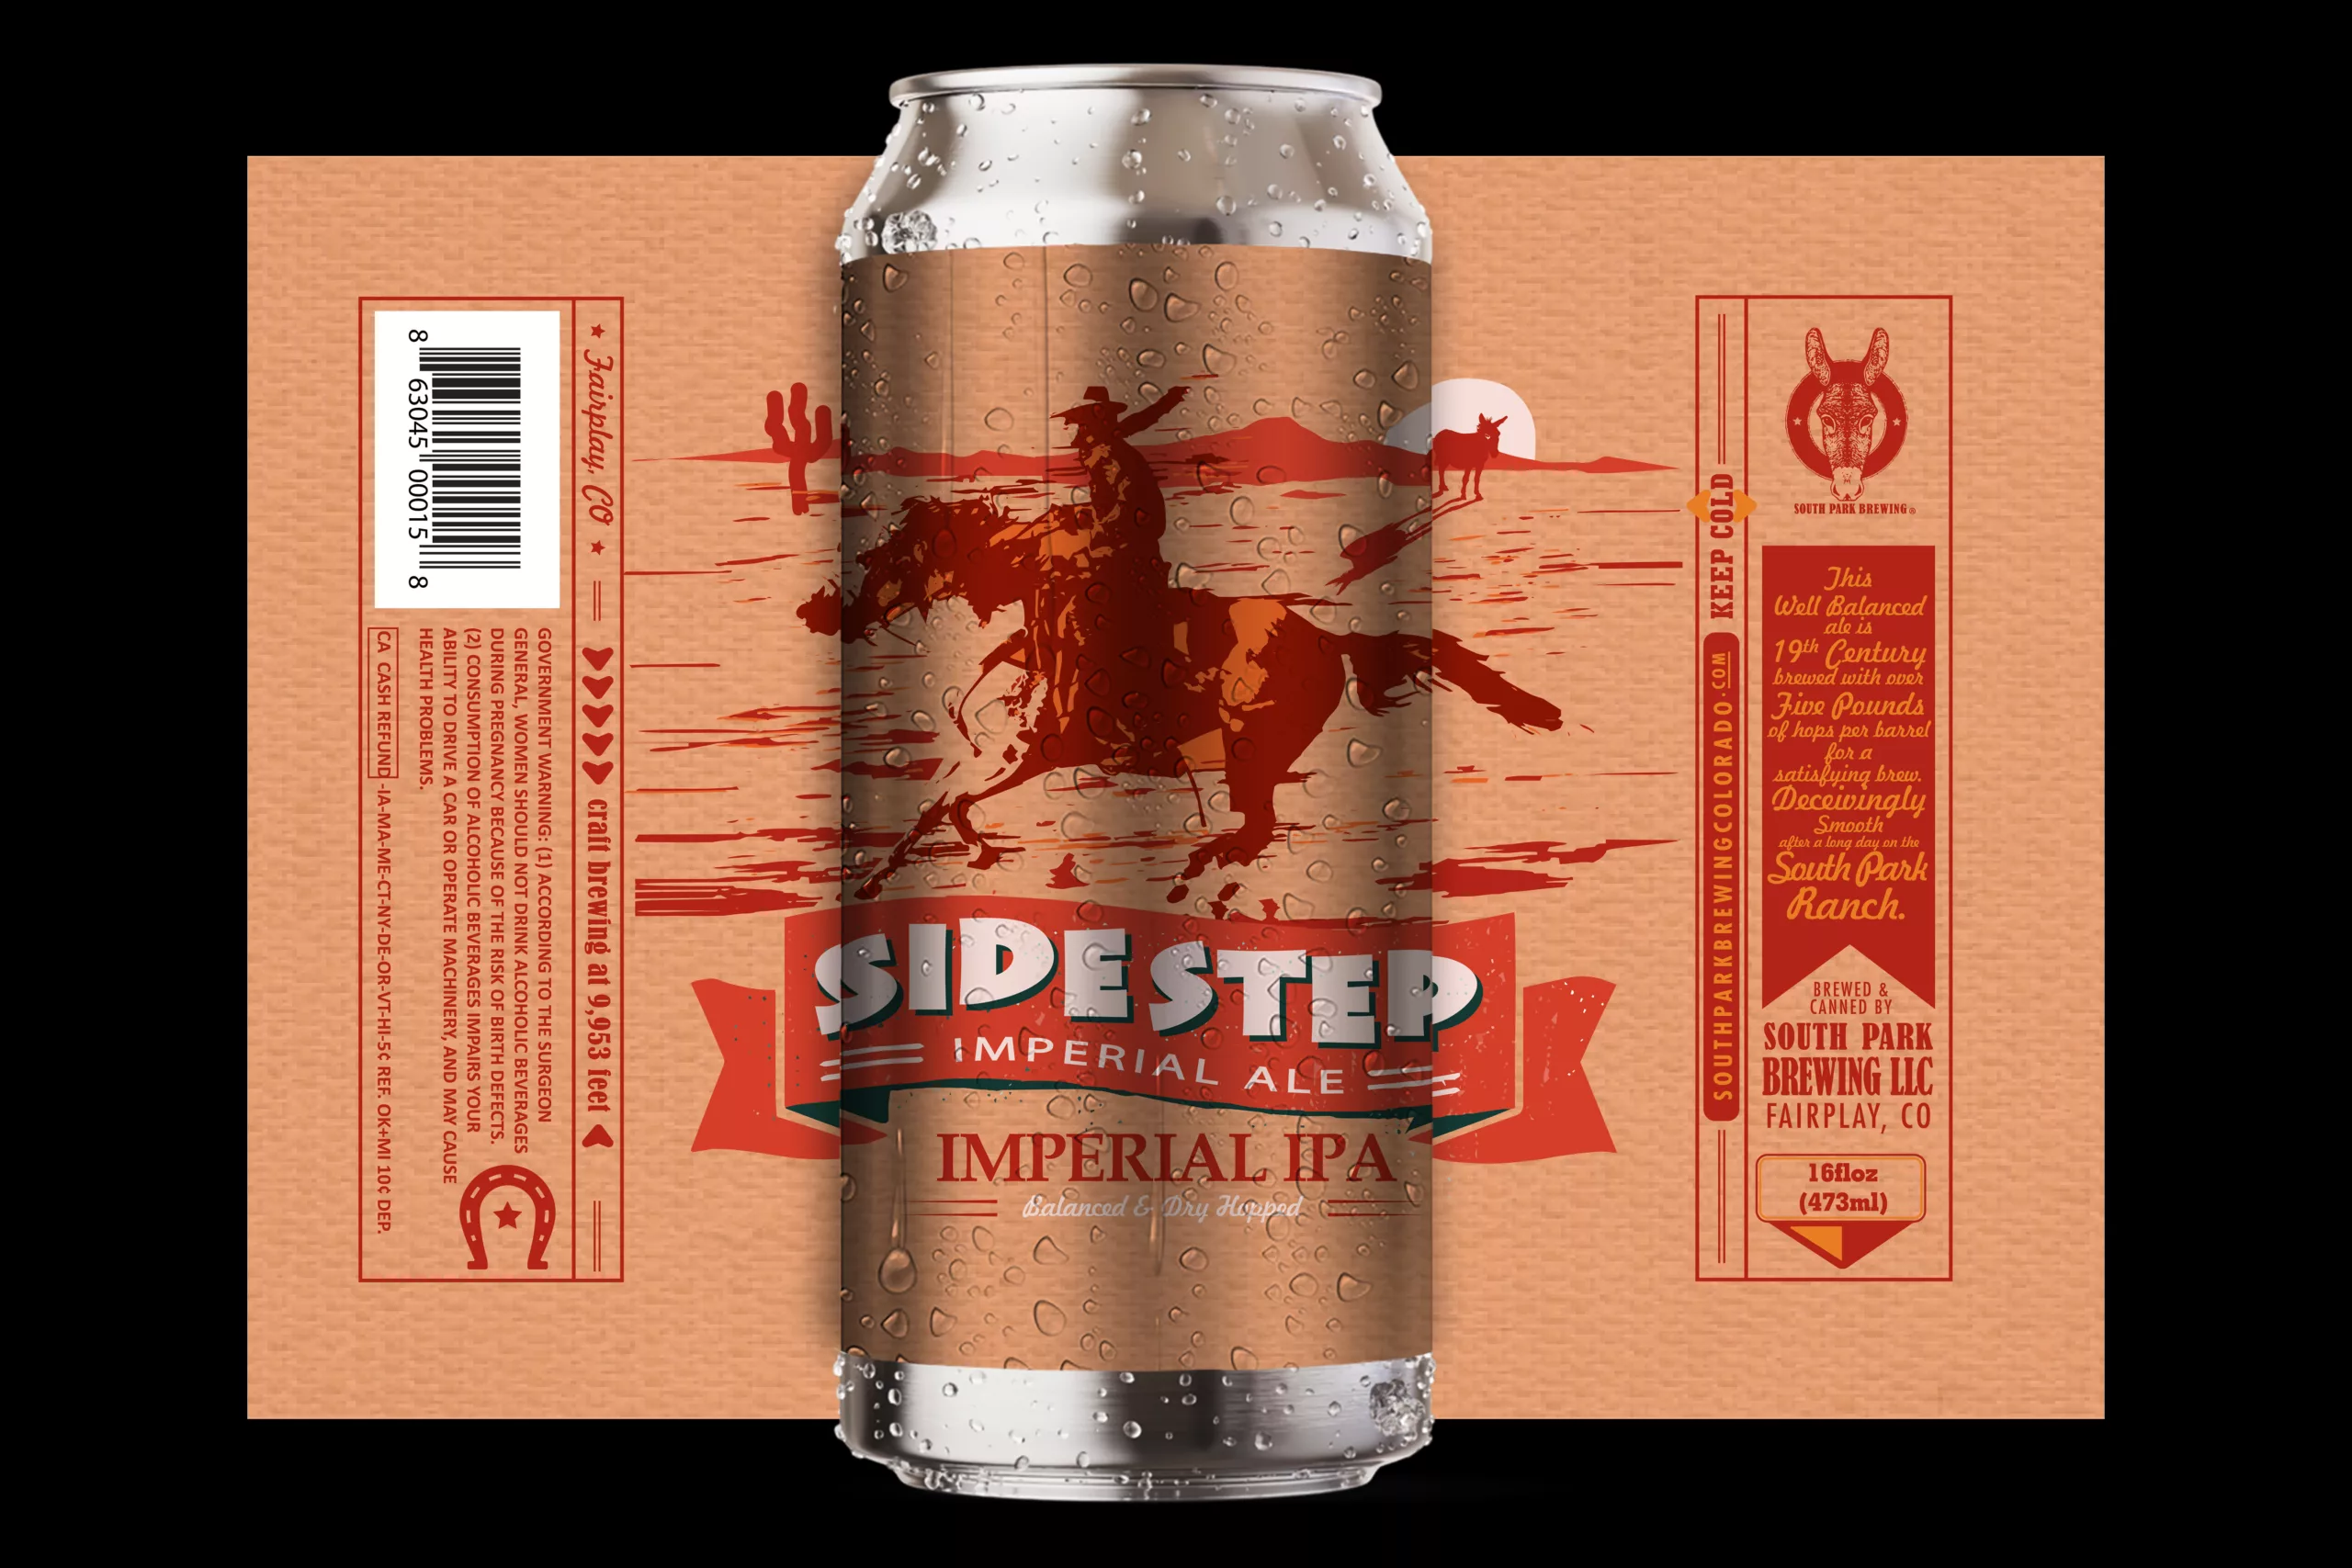 Side Step Imperial Ale